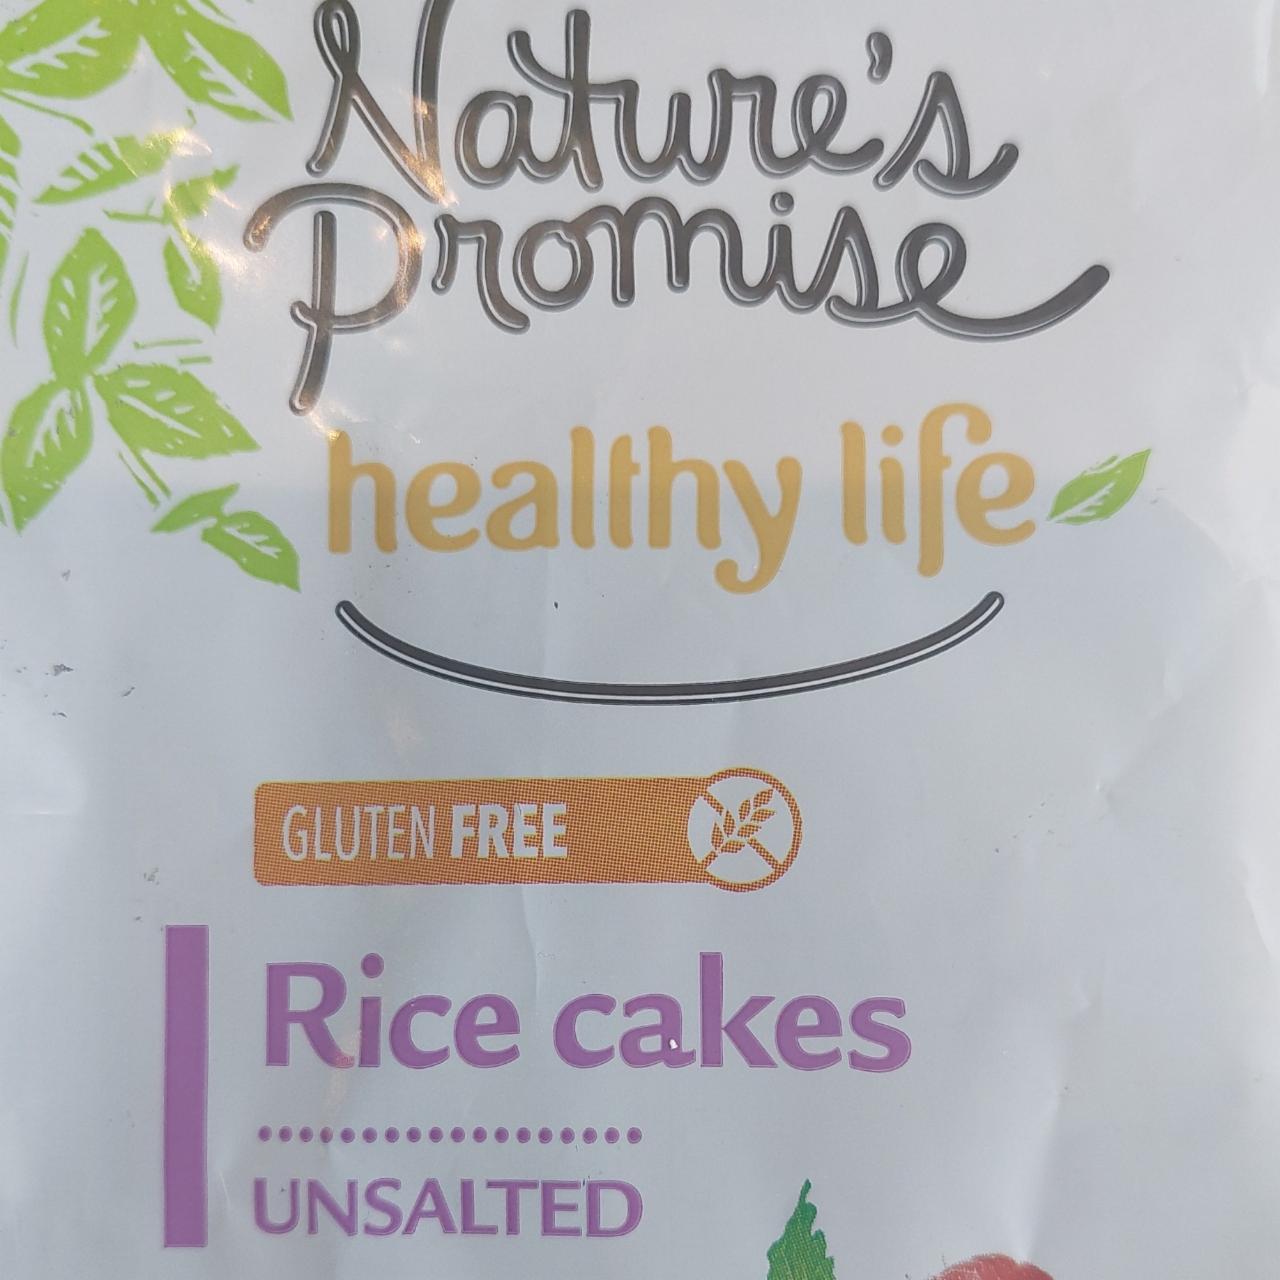 Fotografie - Healthy Life Rice cakes Unsalted Gluten Free Nature's Promise